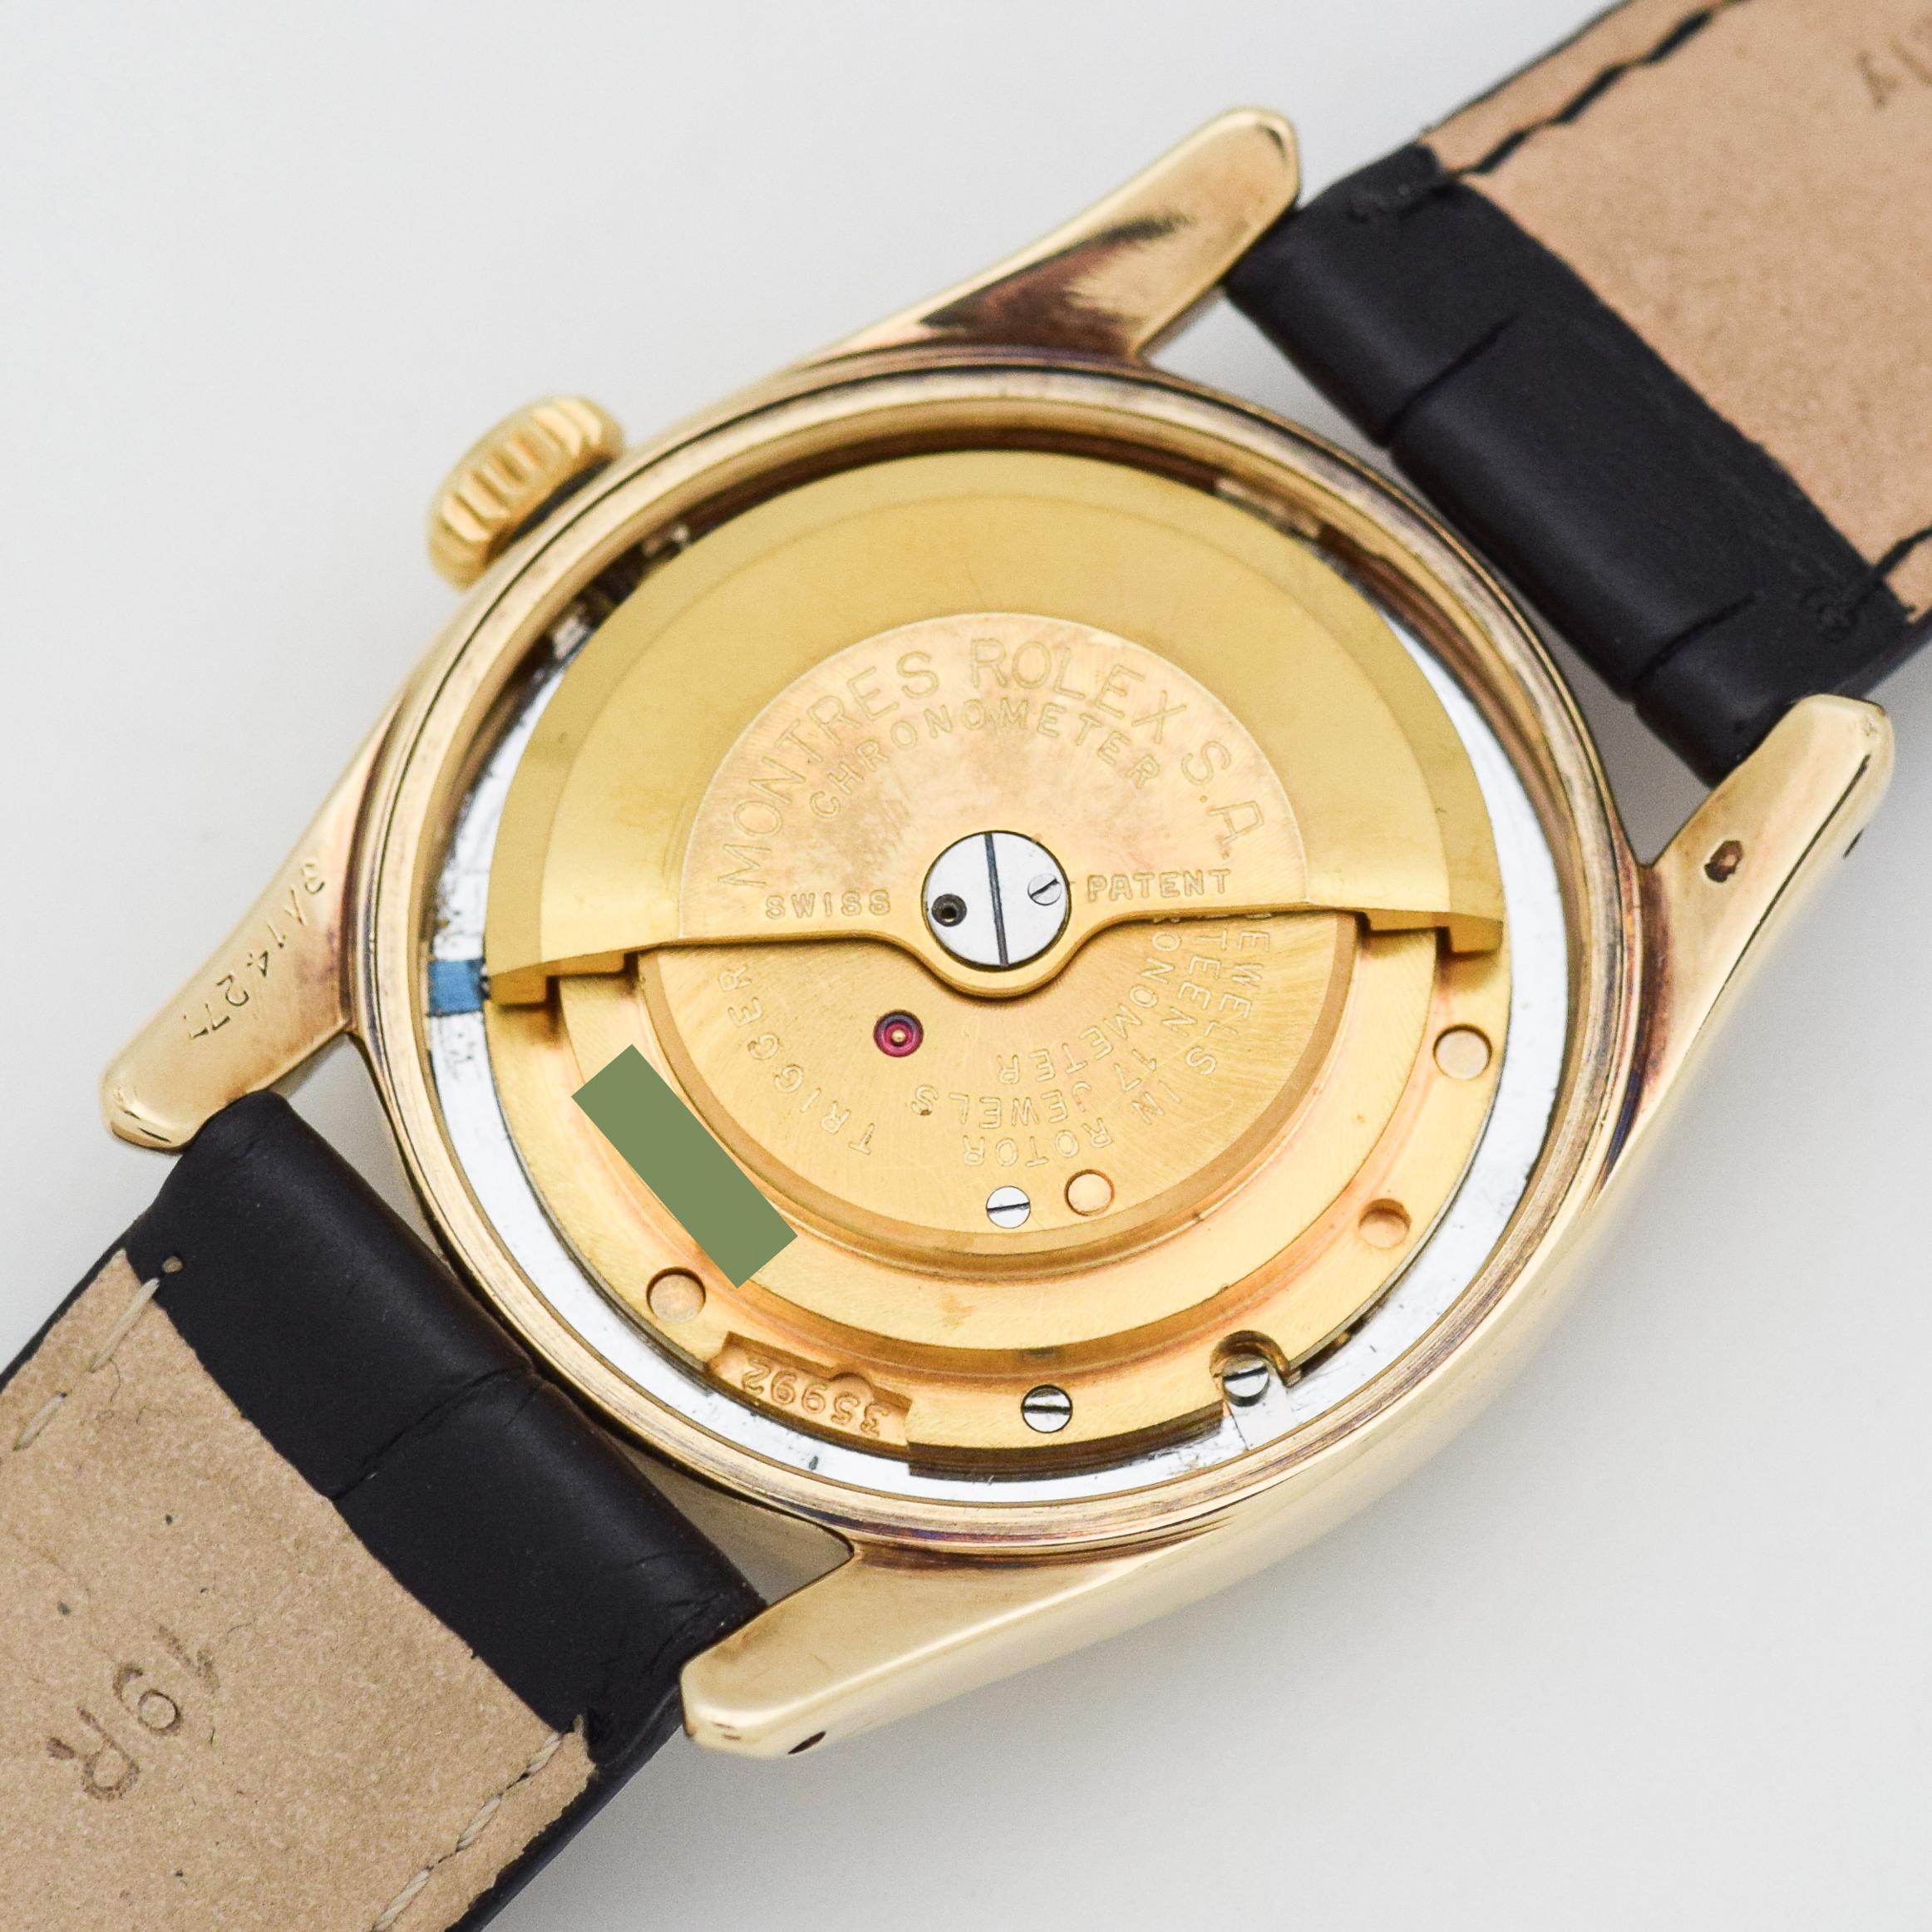 Vintage Rolex Oyster Perpetual Bombe 14 Karat Yellow Gold Watch, 1955 3